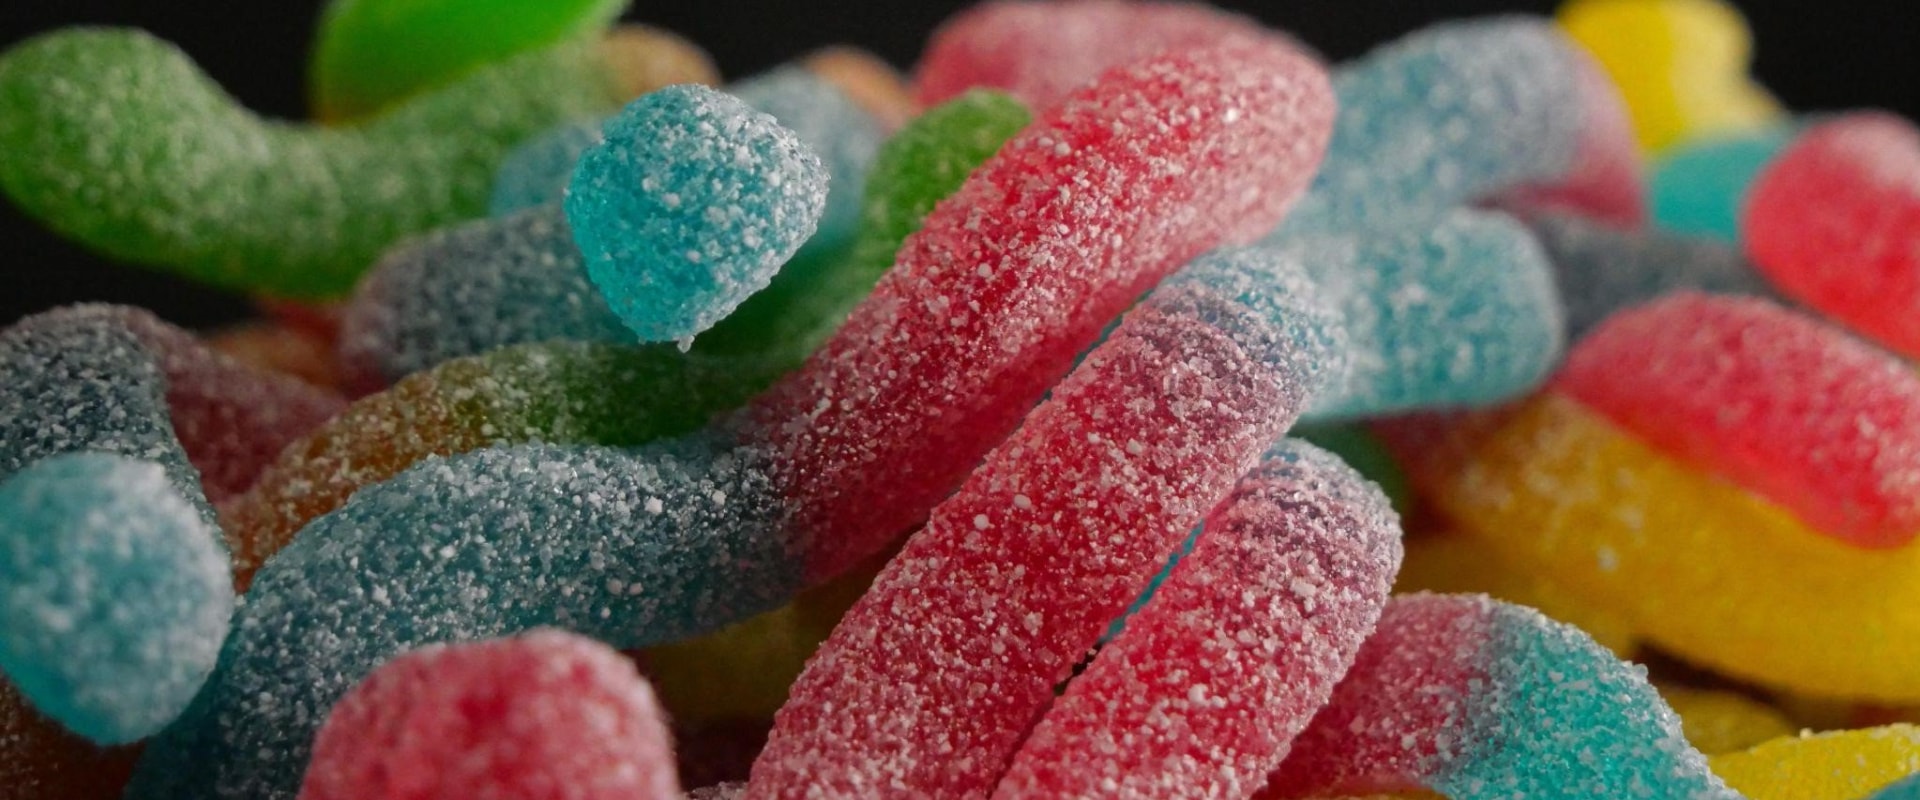 Do delta 9 gummies contain any artificial colors or flavors?